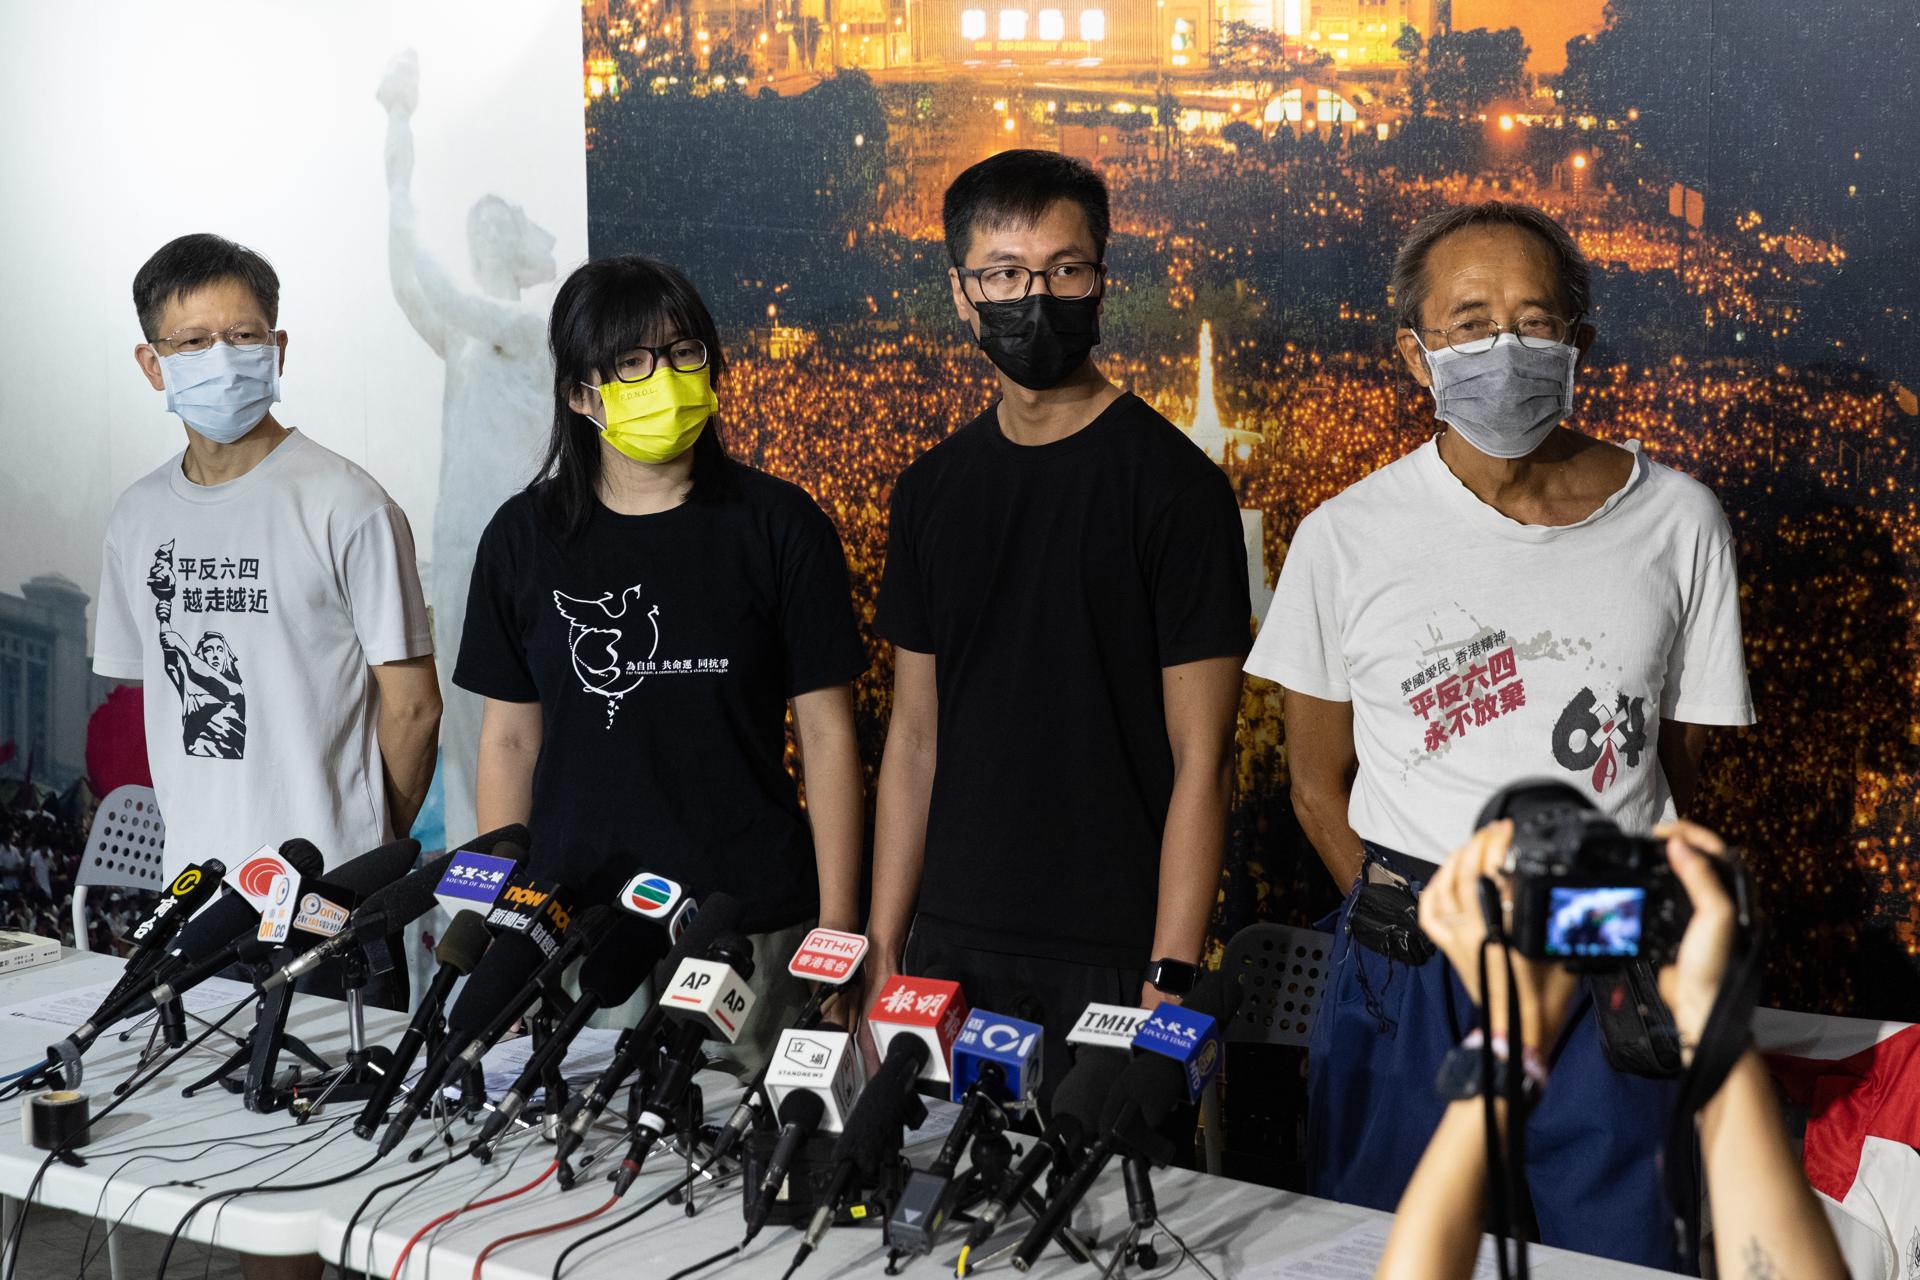 The vice-chairwoman of The Hong Kong Alliance in Support of Patriotic Democratic Movements in China Chow Hang-tung (2-L) and fellow alliance members Leung Kam-wai (2-R), and Tang Ngok-kwan (L), meet reporters in Hong Kong, China, 05 September 2021, (issued 08 September 2021). EFE-EPA FILE/JEROME FAVRE